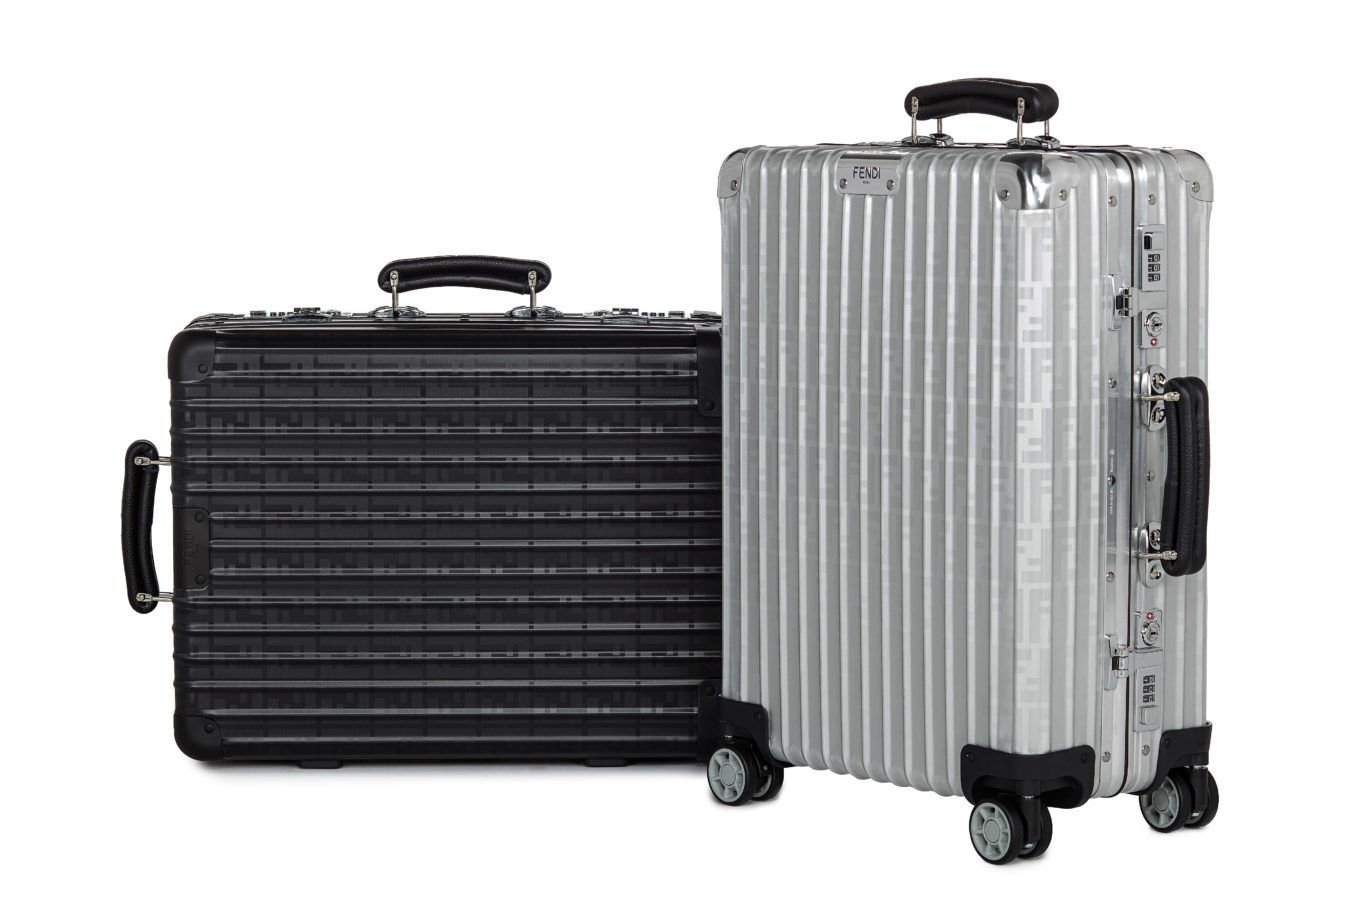 Fendi collaborates with Rimowa to launch an exclusive suitcase